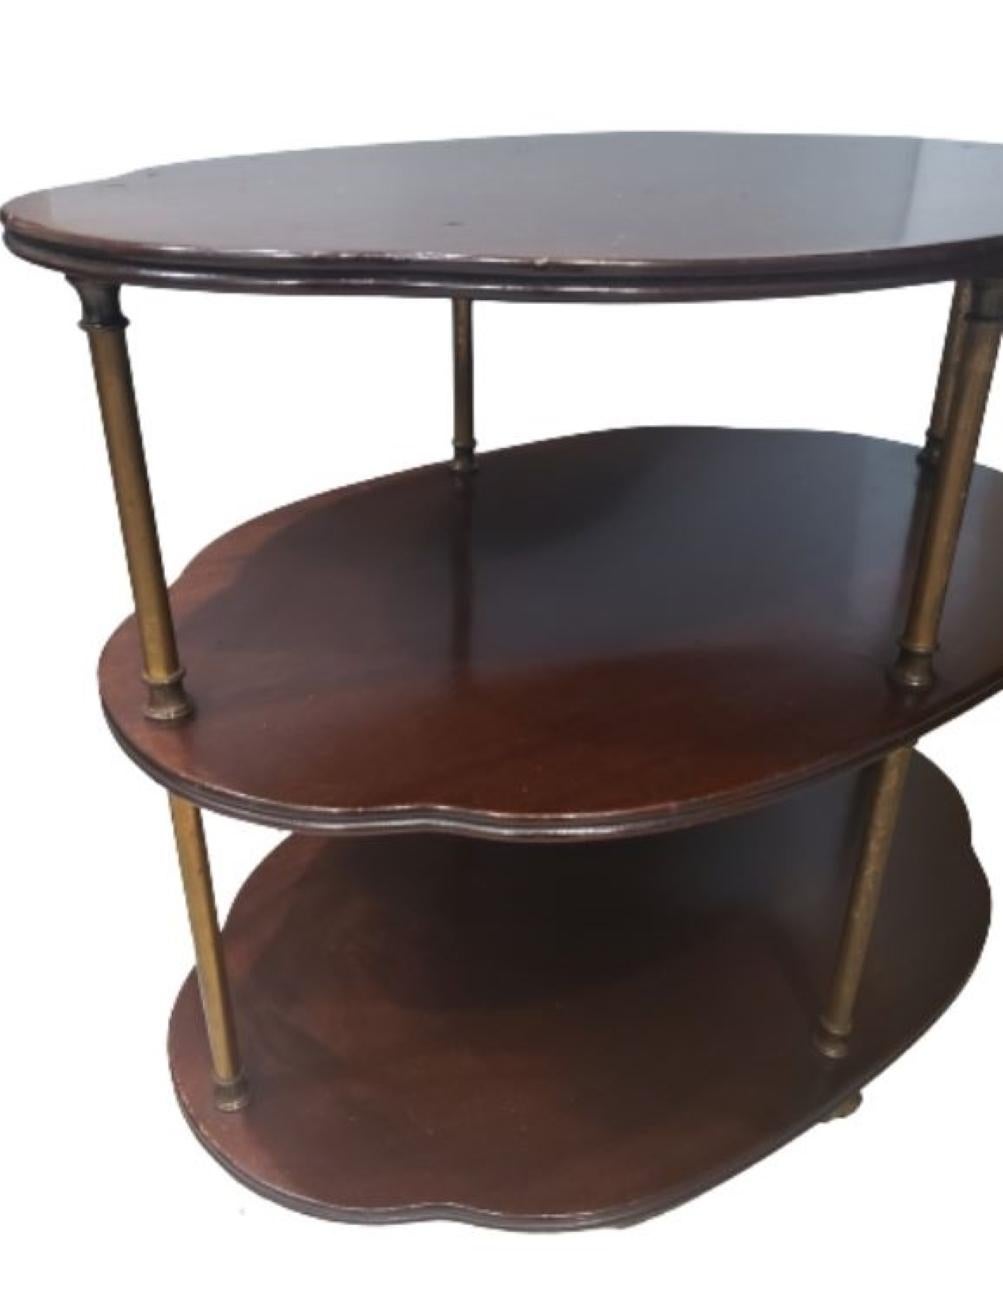 20th Century 1950s Hollywood Regency 3 Tier Mahogany and Brass Server, Bar Cart on Casters For Sale